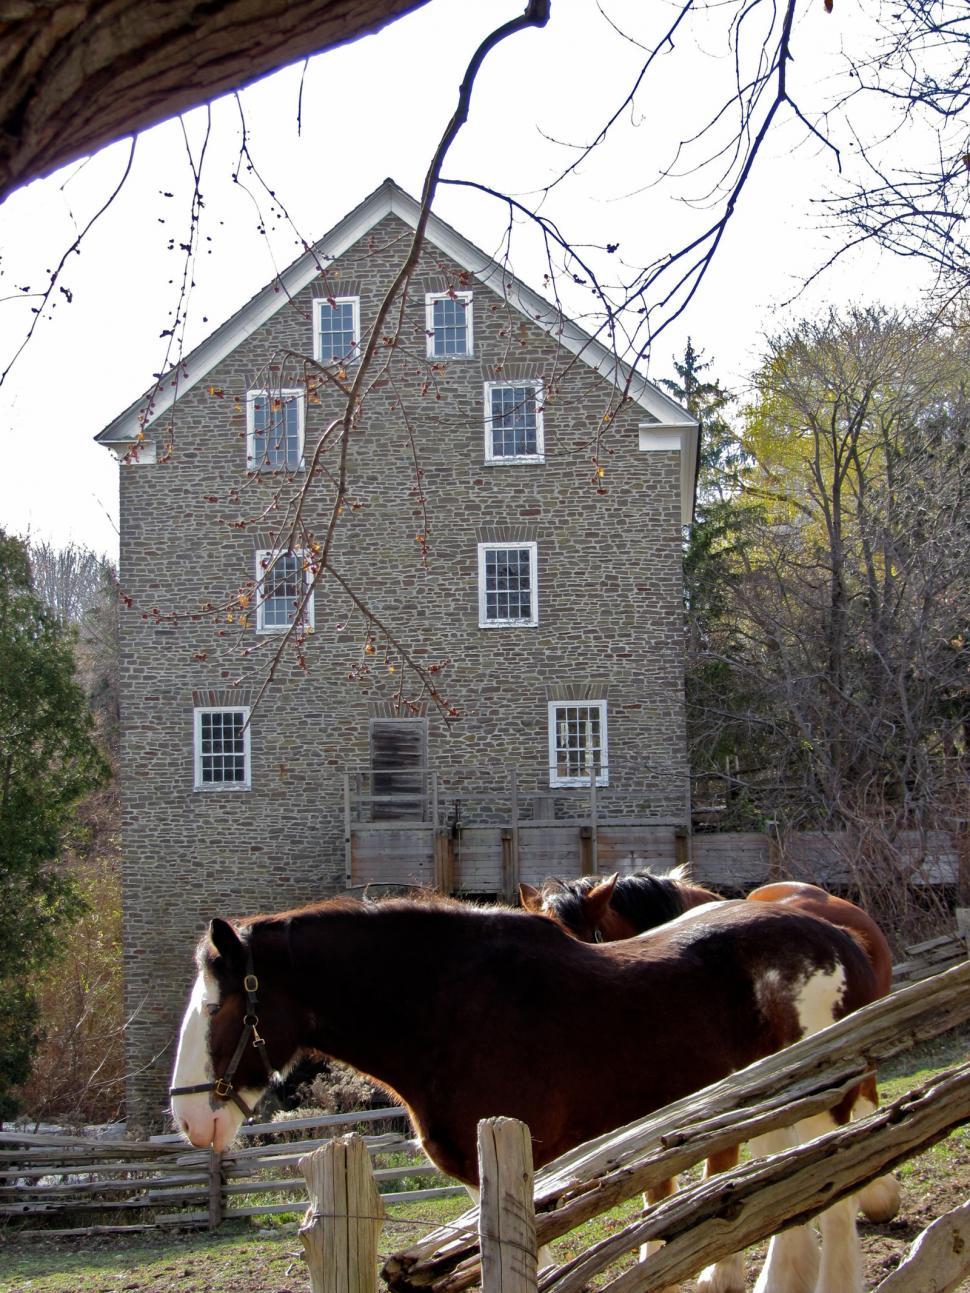 Free Image of Horse and Building 